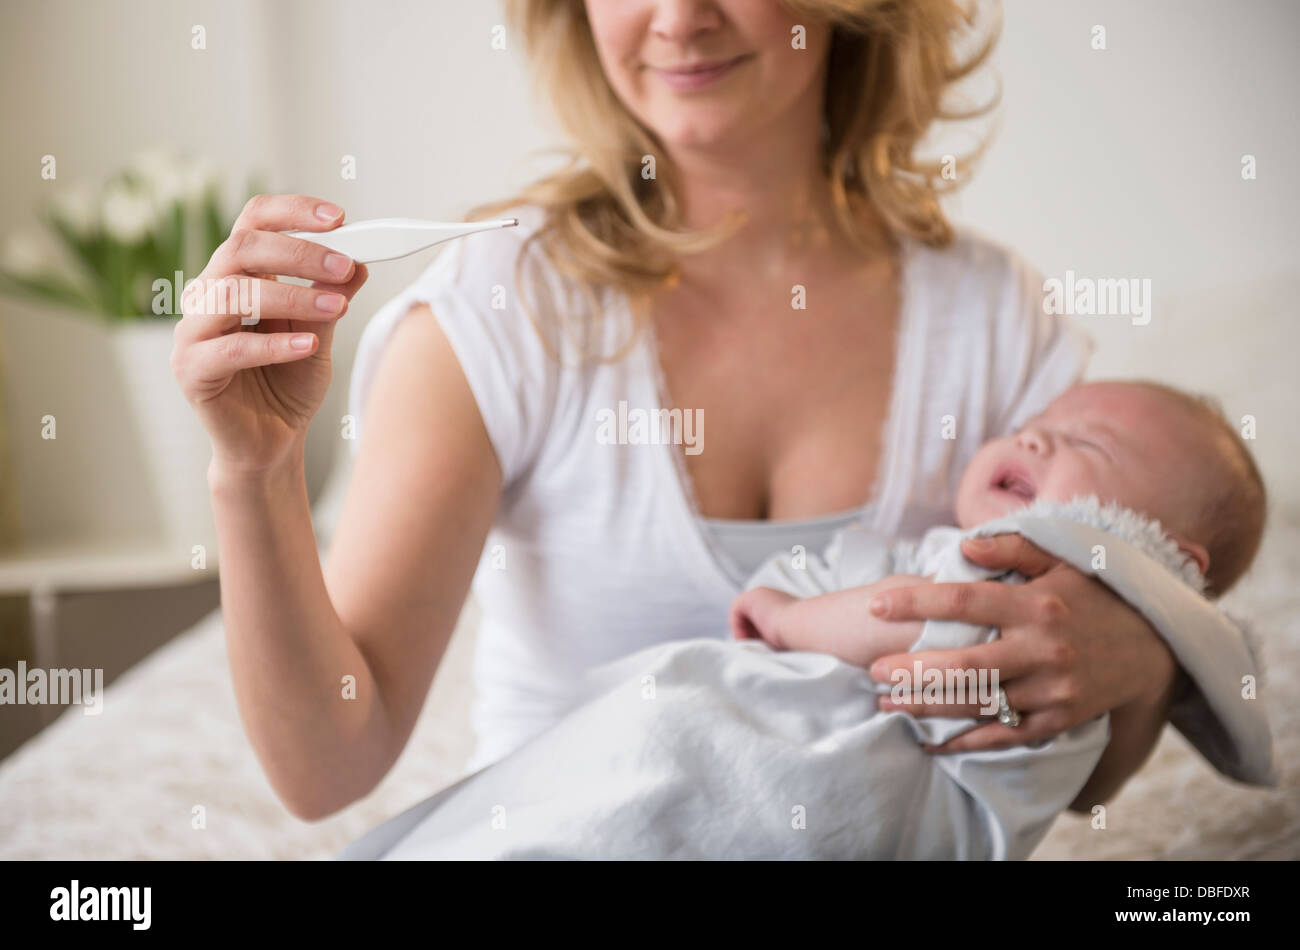 Caucasian mother taking crying baby's temperature Stock Photo